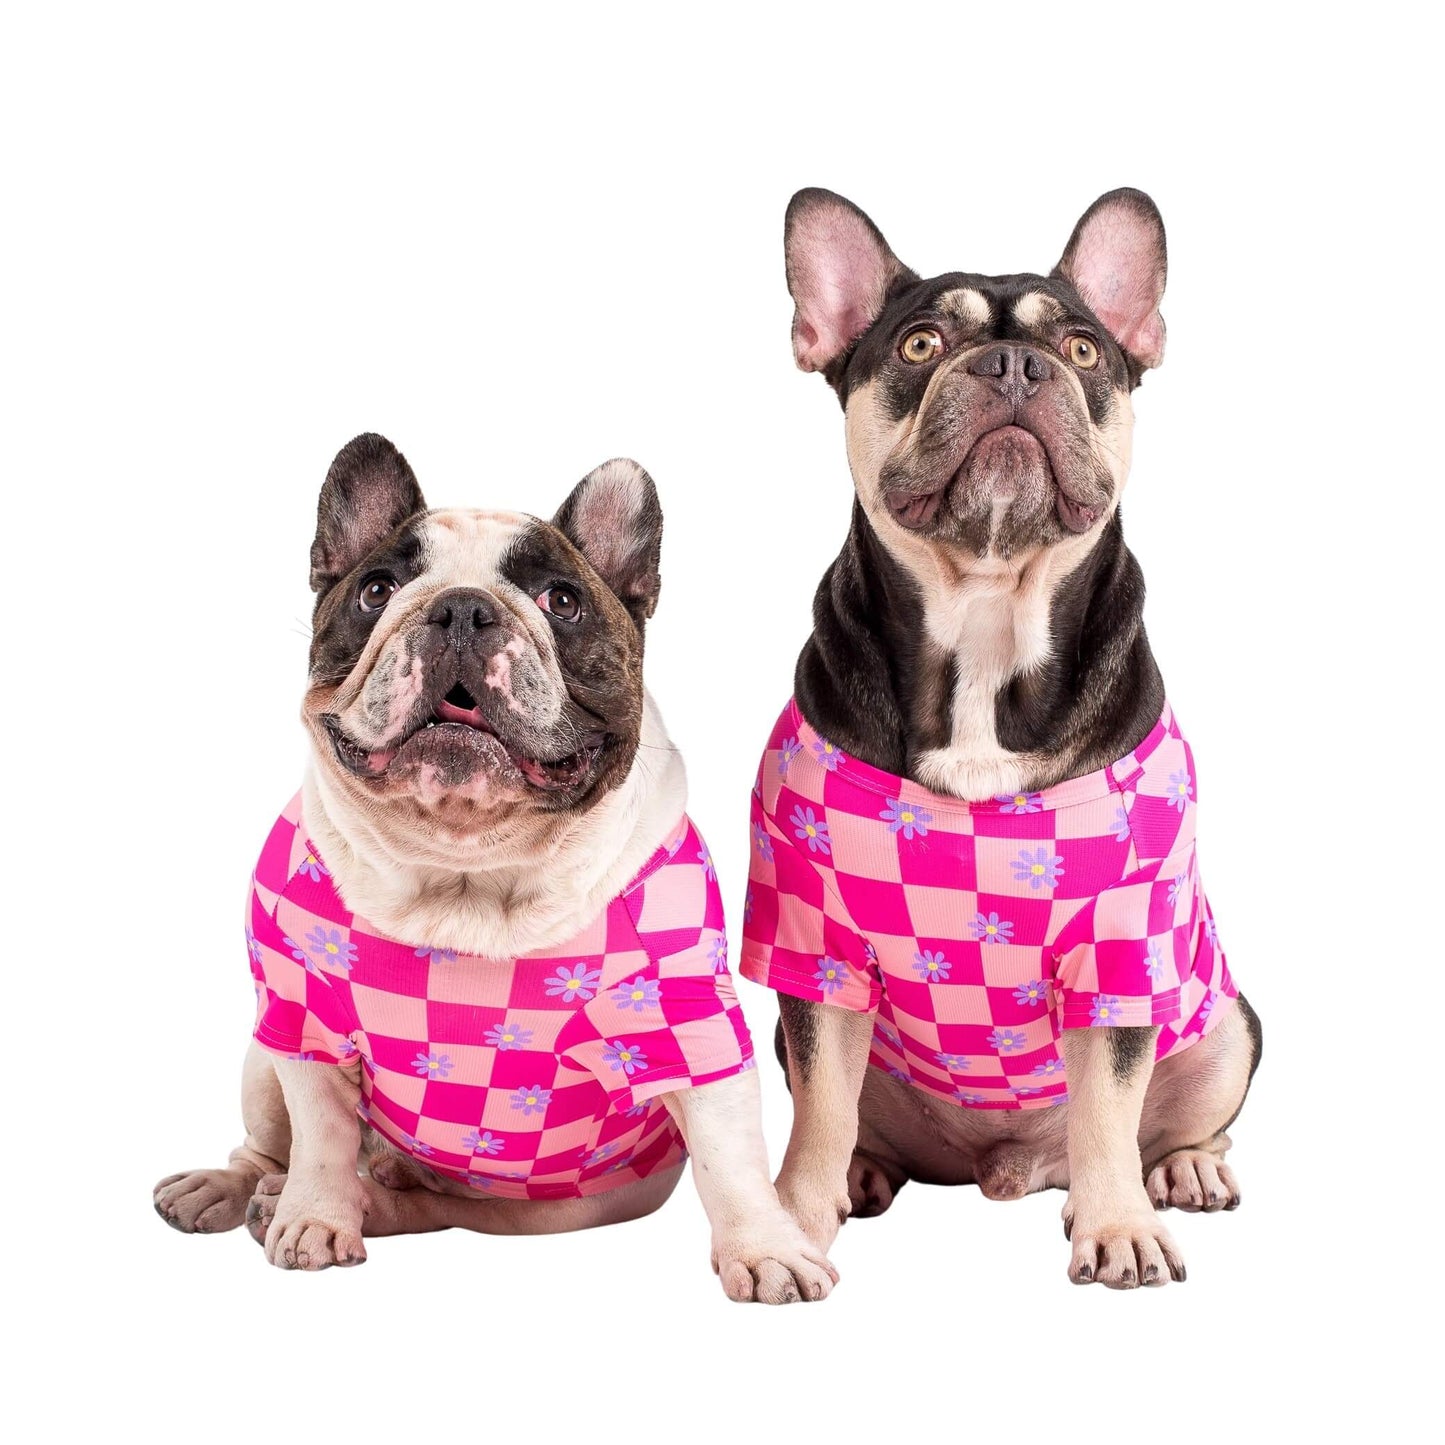 Two French Bulldogs wearing Vibrant Hounds Crazy Daisy cooling shirt for dogs. It is pink chequered with daisys printed on it.